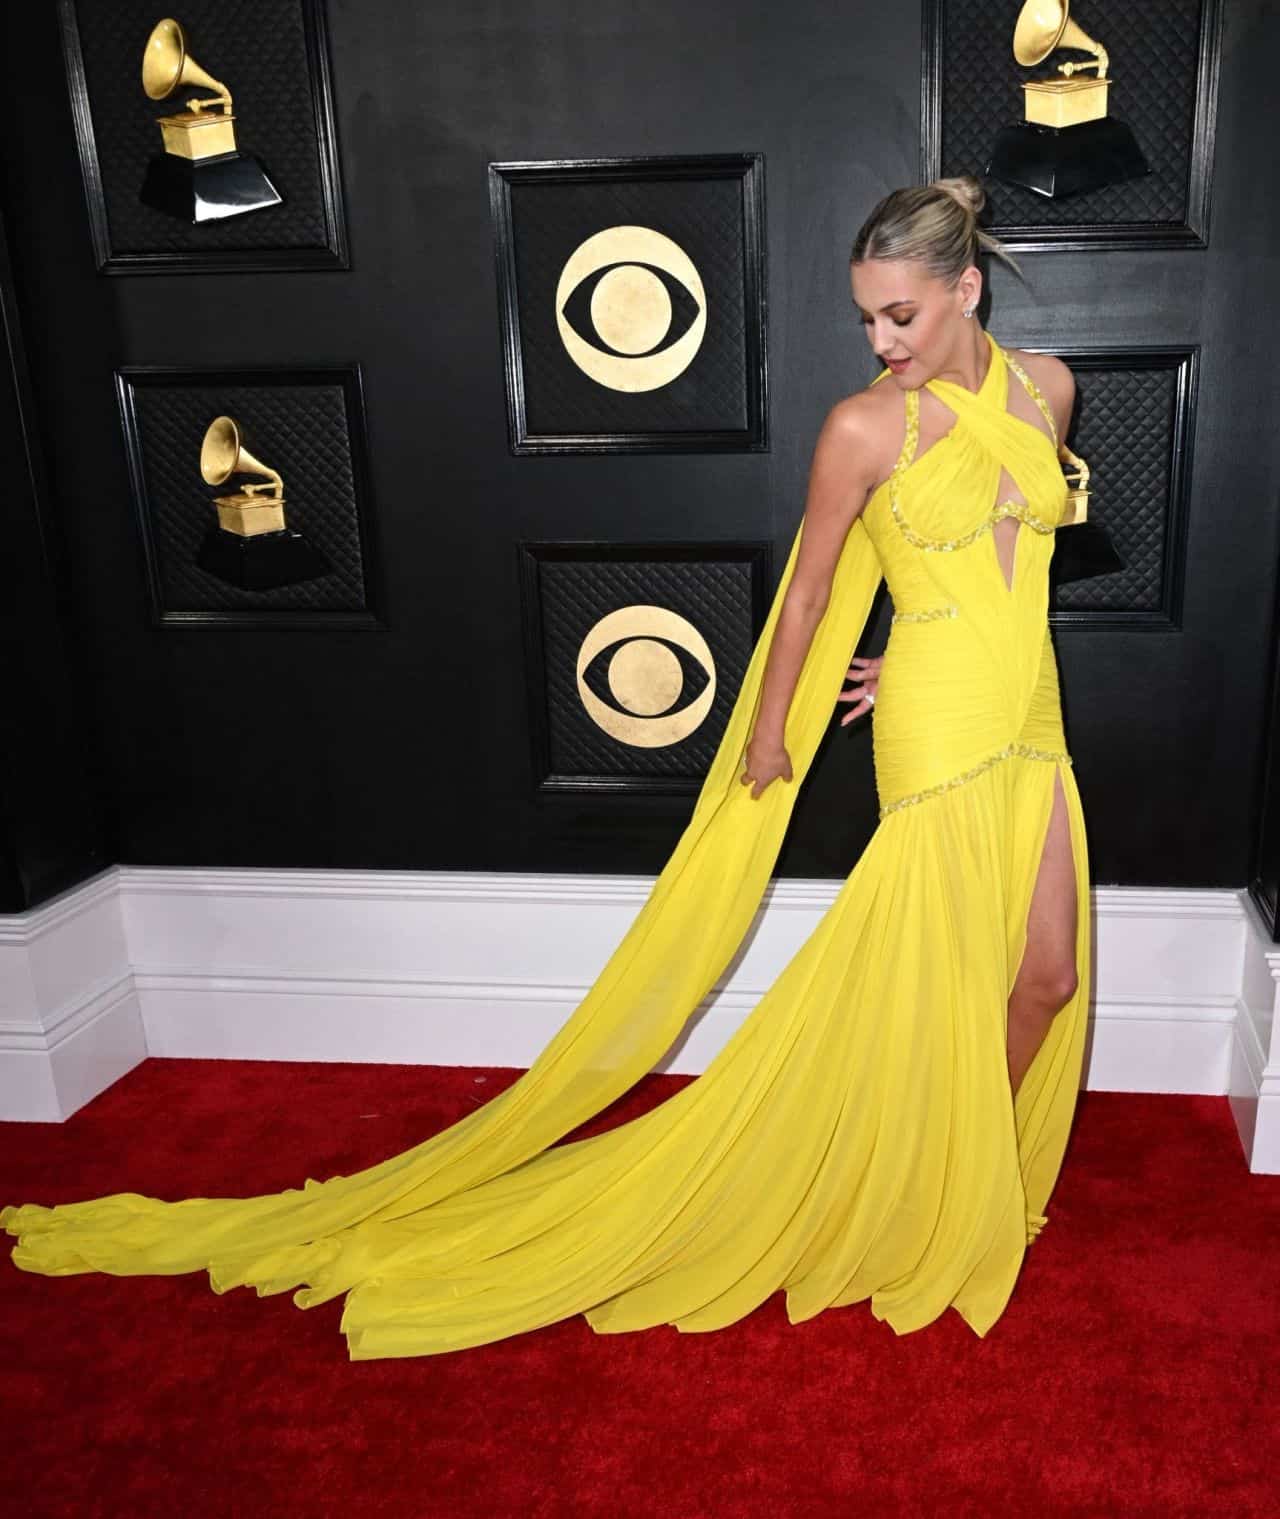 Kelsea Ballerini Shines at 65th Grammy Awards in Eye-Catching Yellow Gown